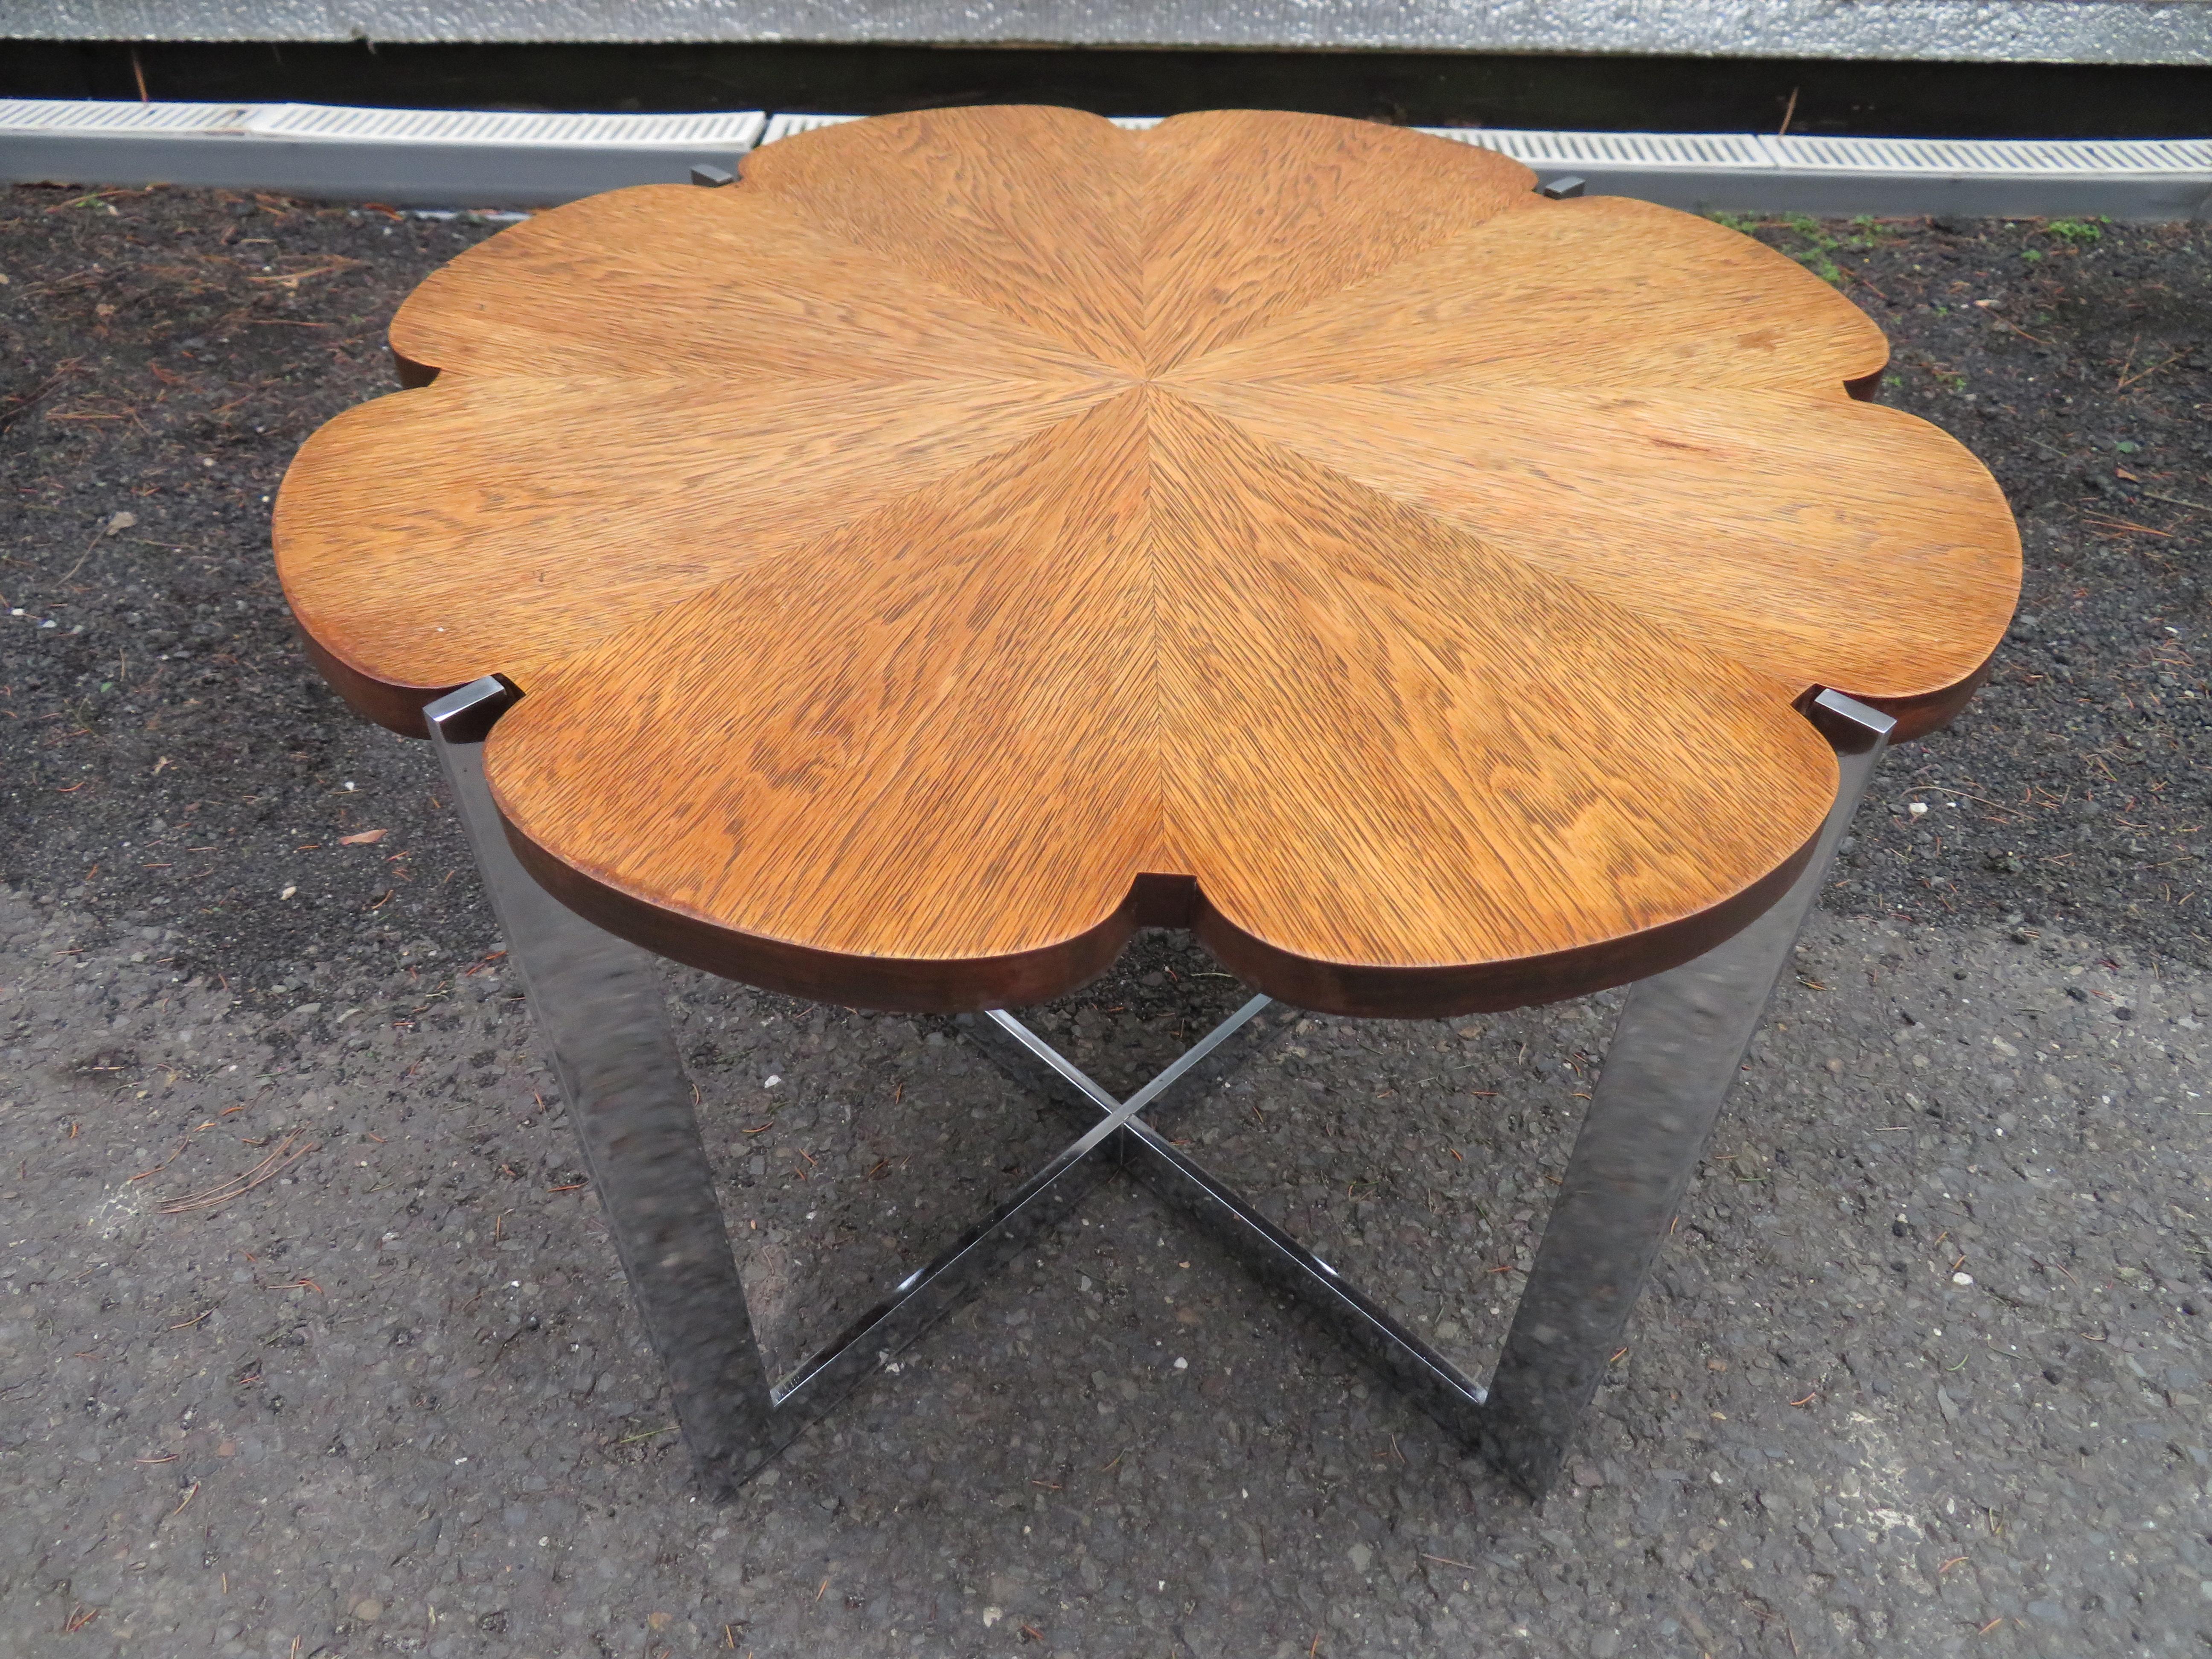 Fabulous Milo Baughman style chrome X base side table. This wonderful piece has a super heavy chrome base with a thick piece of vintage glass. We also have a matching walnut top flower table with same exact chrome base listed in another of our